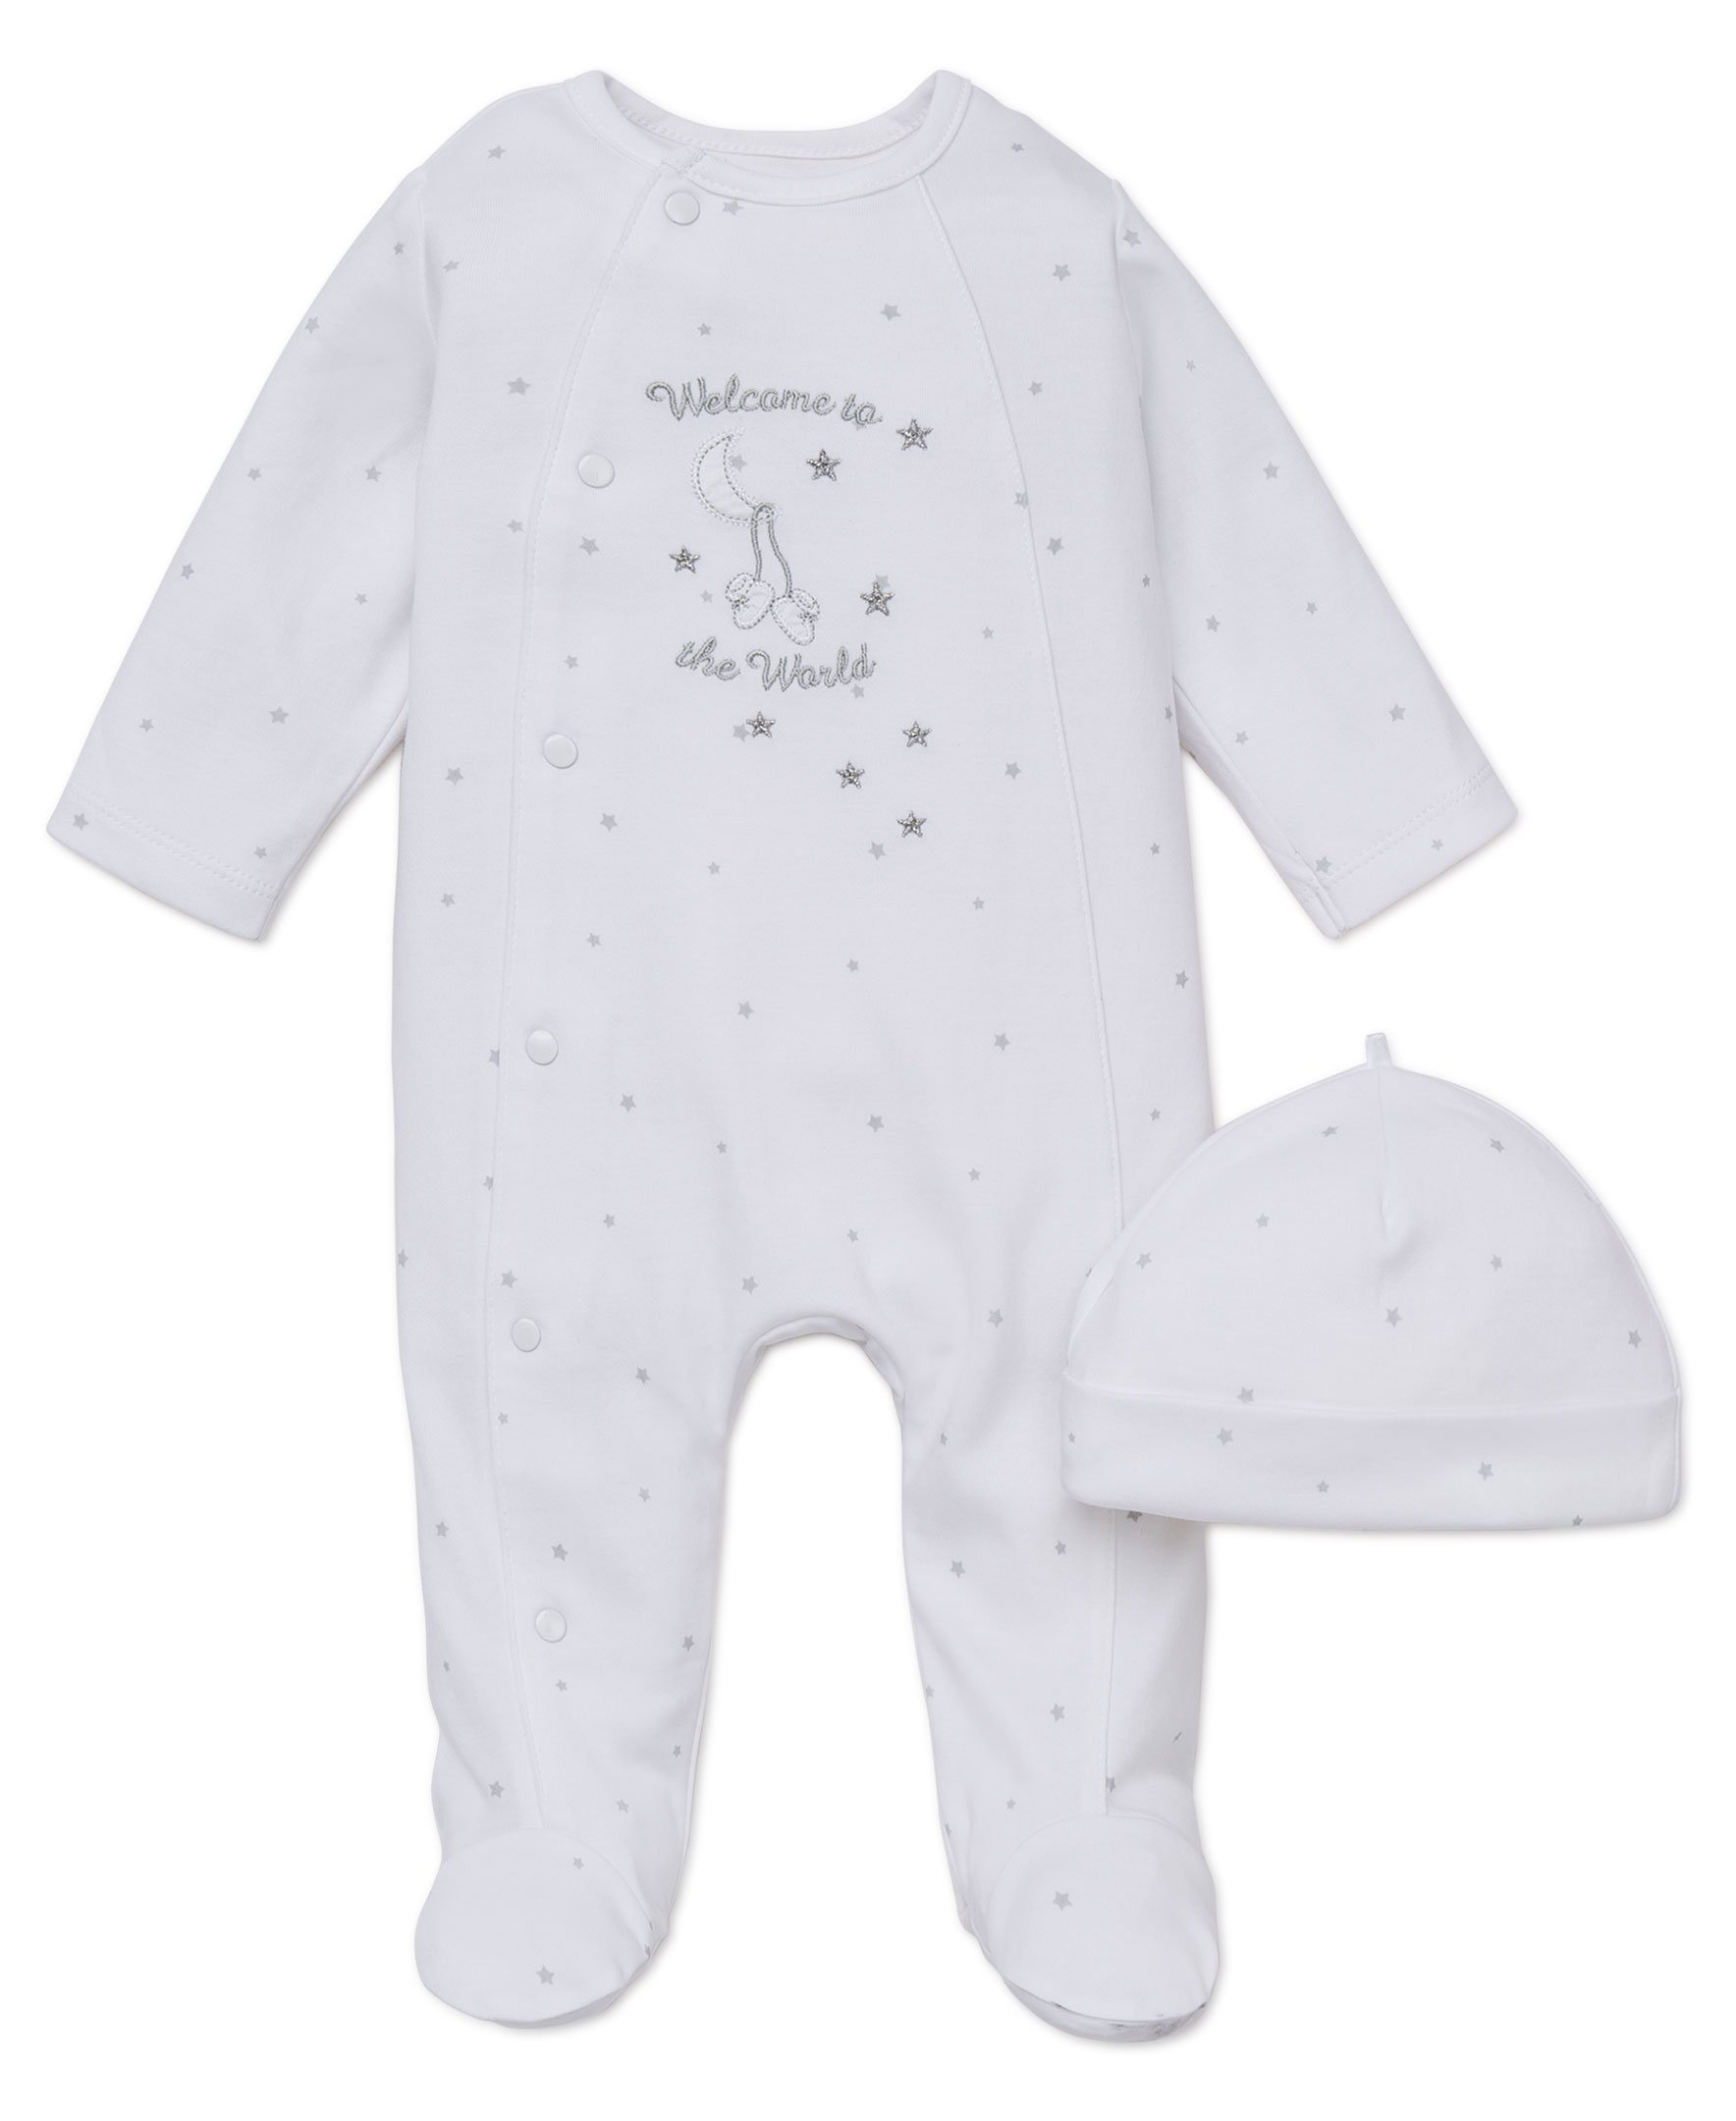 Little Me Baby 2-Piece Welcome to the World Footie and Cap Set